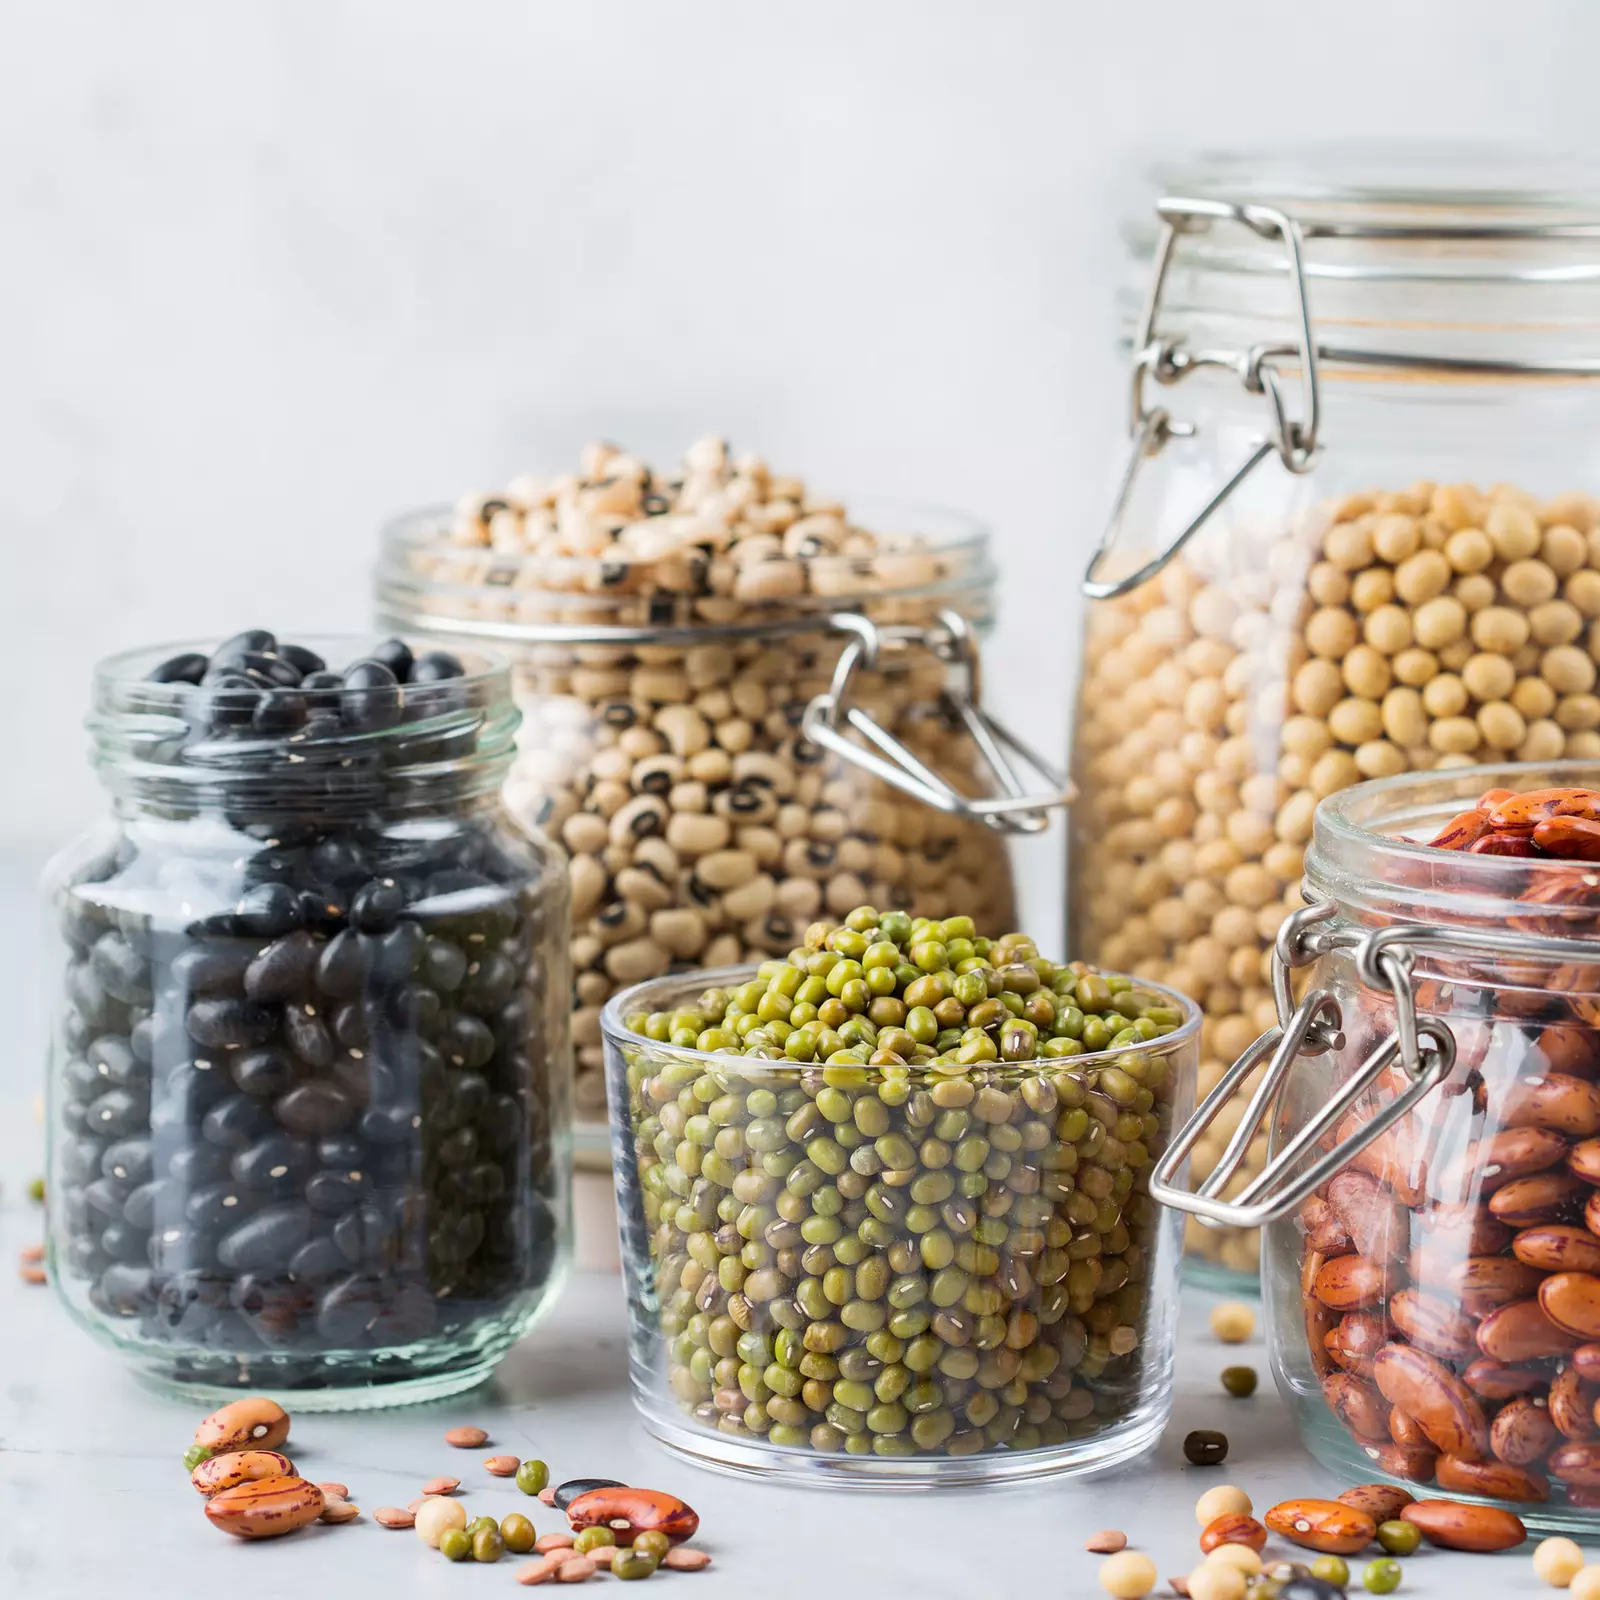 A photo of several jars holding a variety of beans